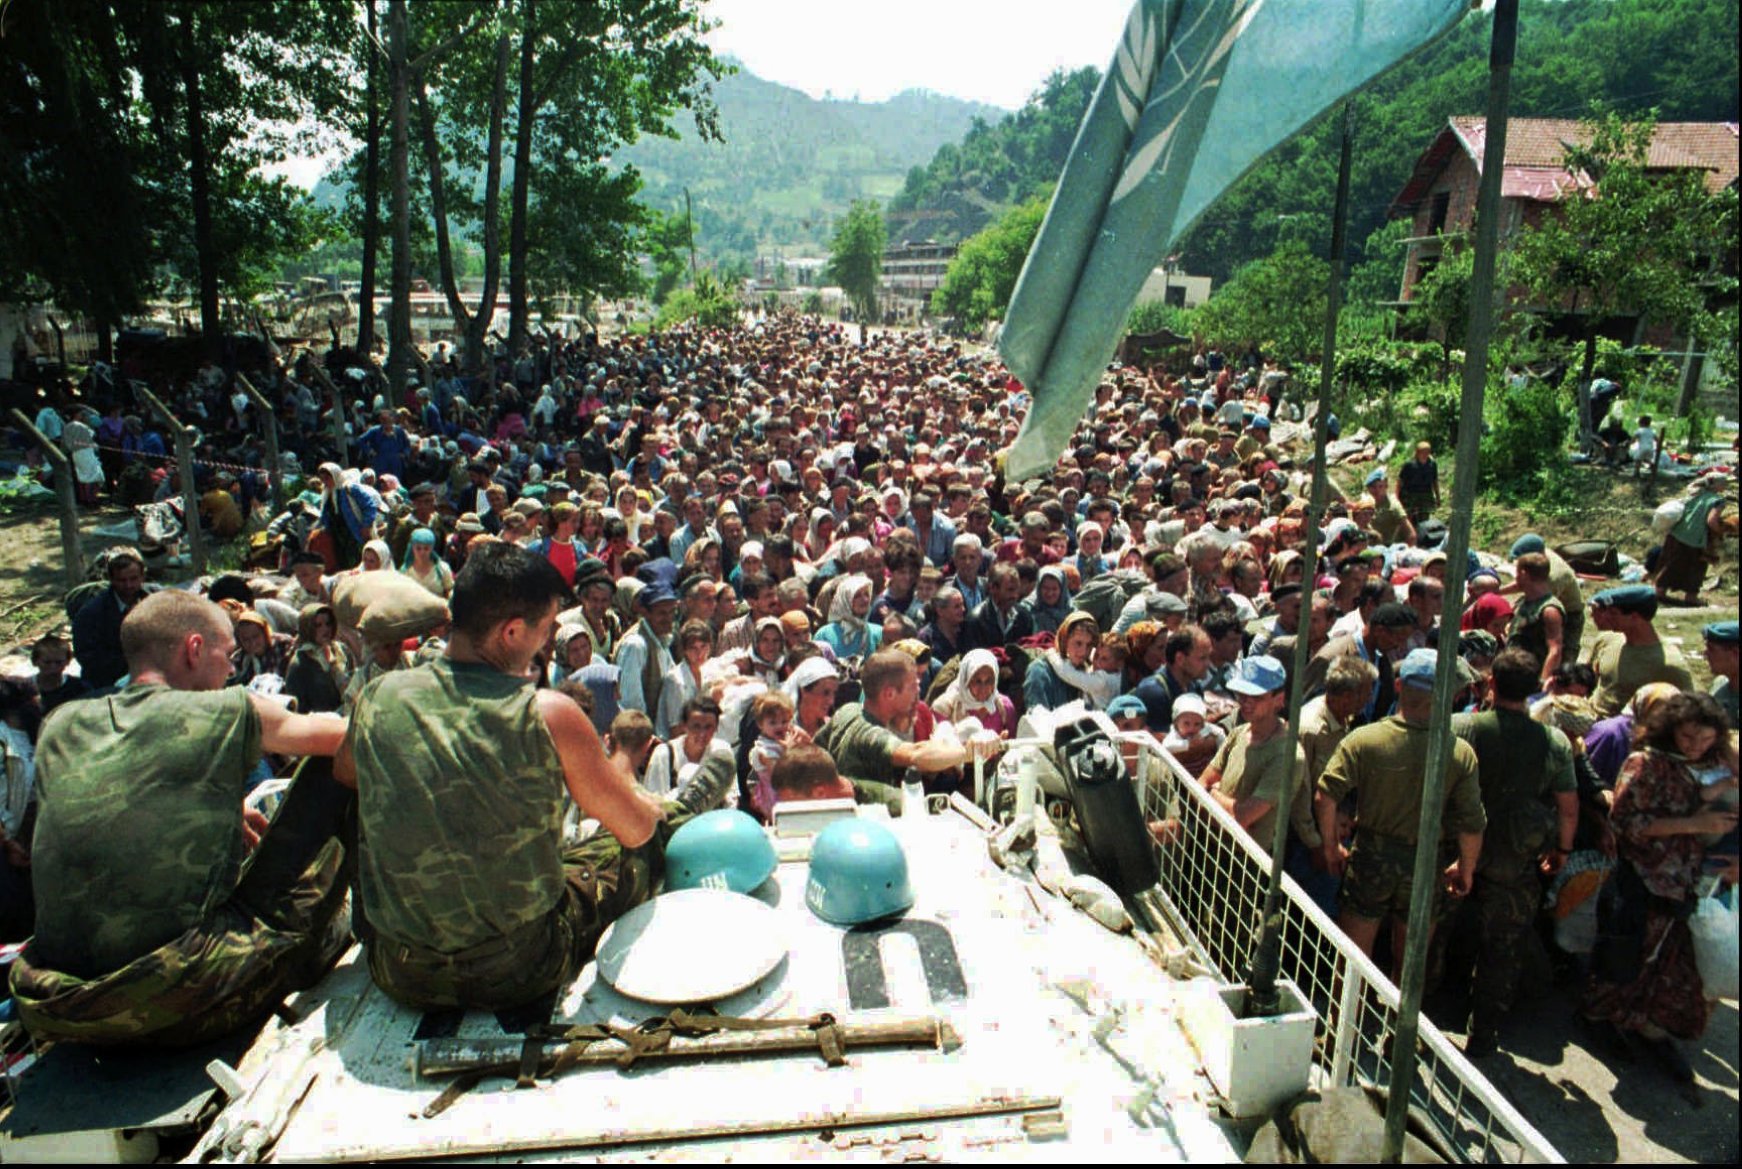  By seeking to eliminate a part of the Bosnian Muslims, the Bosnian Serb forces committed genocide.